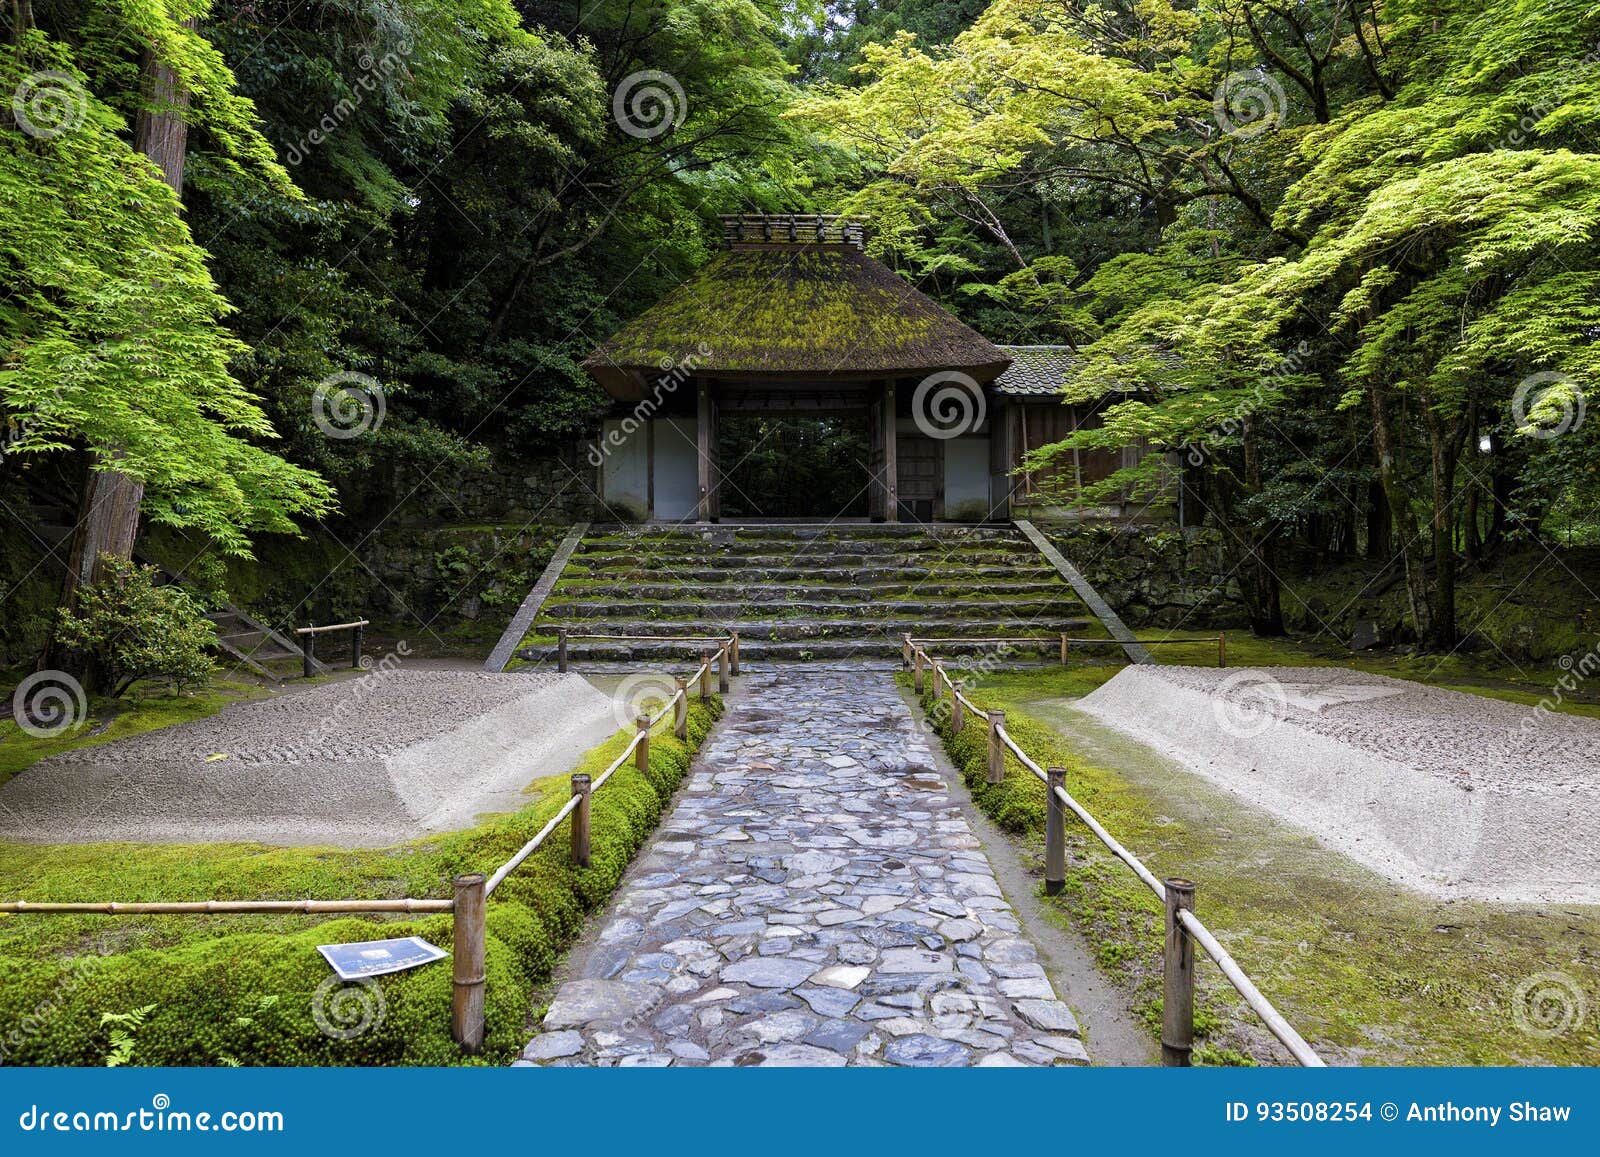 honen-in, a buddhist temple located in kyoto, japan